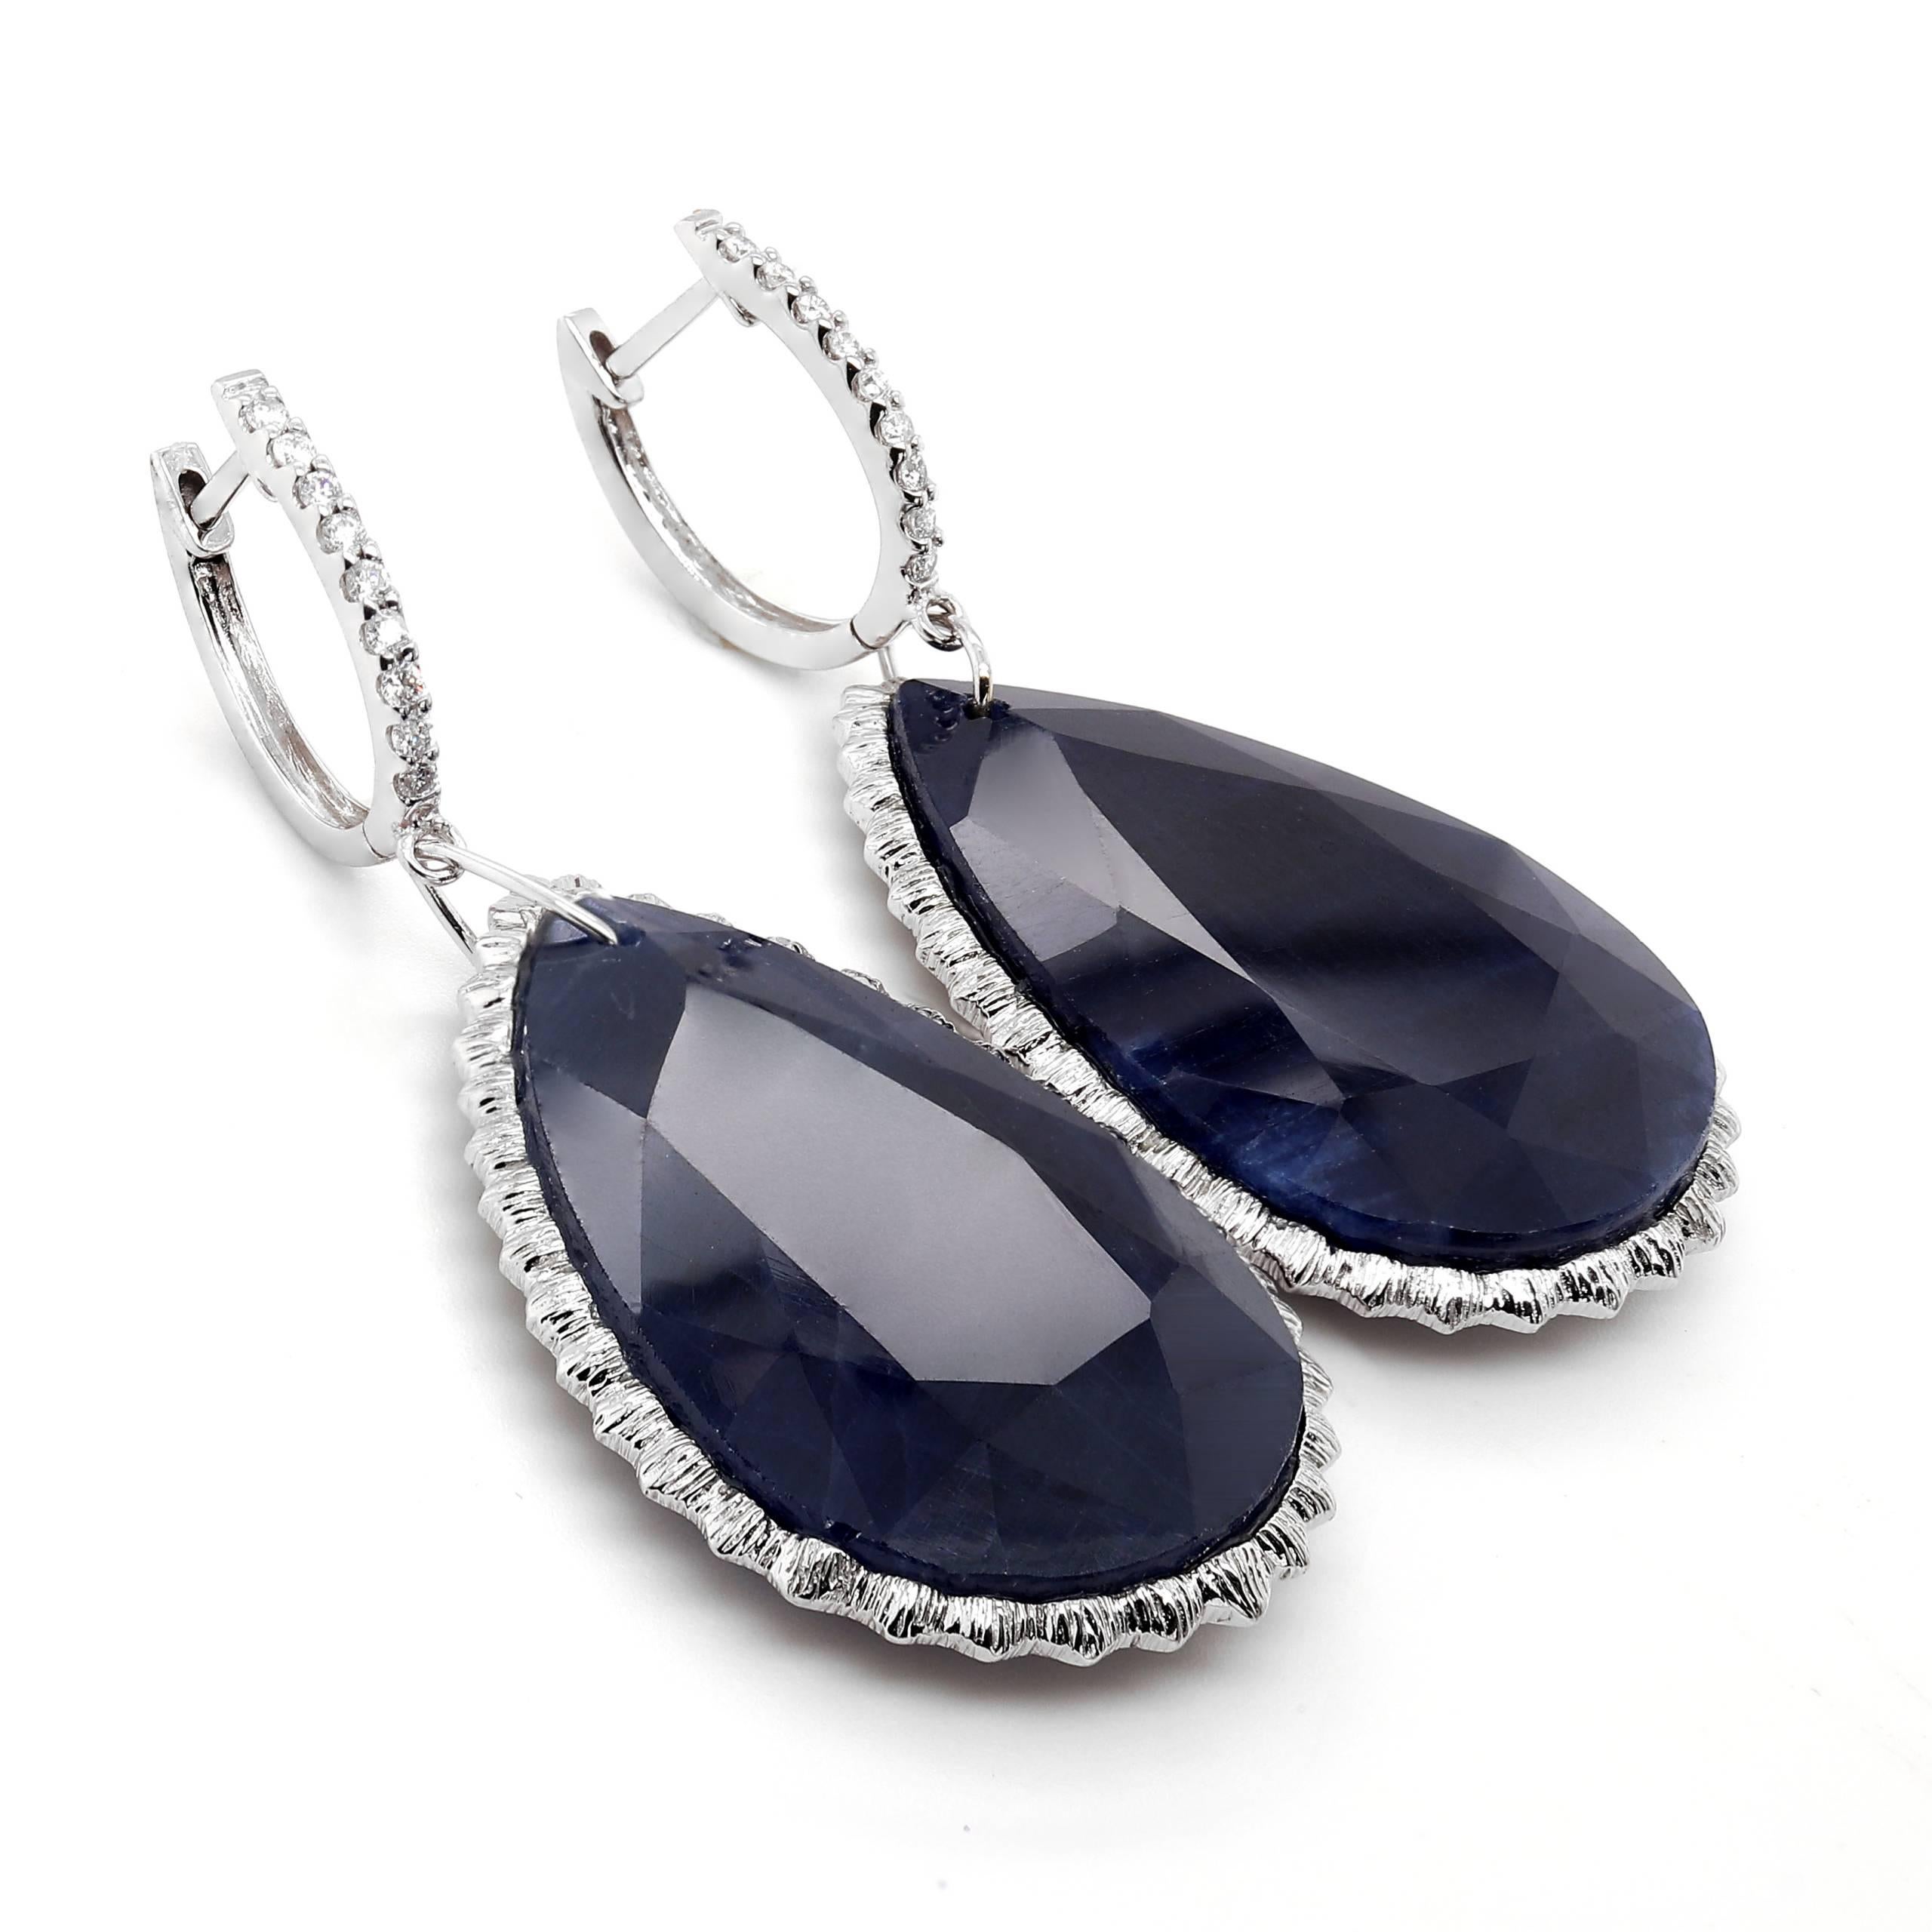 Dangle earrings with 2 blue cabochon pear shape Sapphires of about 77.21 carats. Sapphires are surrounded by 18 round brilliant cut Diamonds of about 0.14 carats with a clarity of SI and color H. All stones are set in 18k white gold. The total